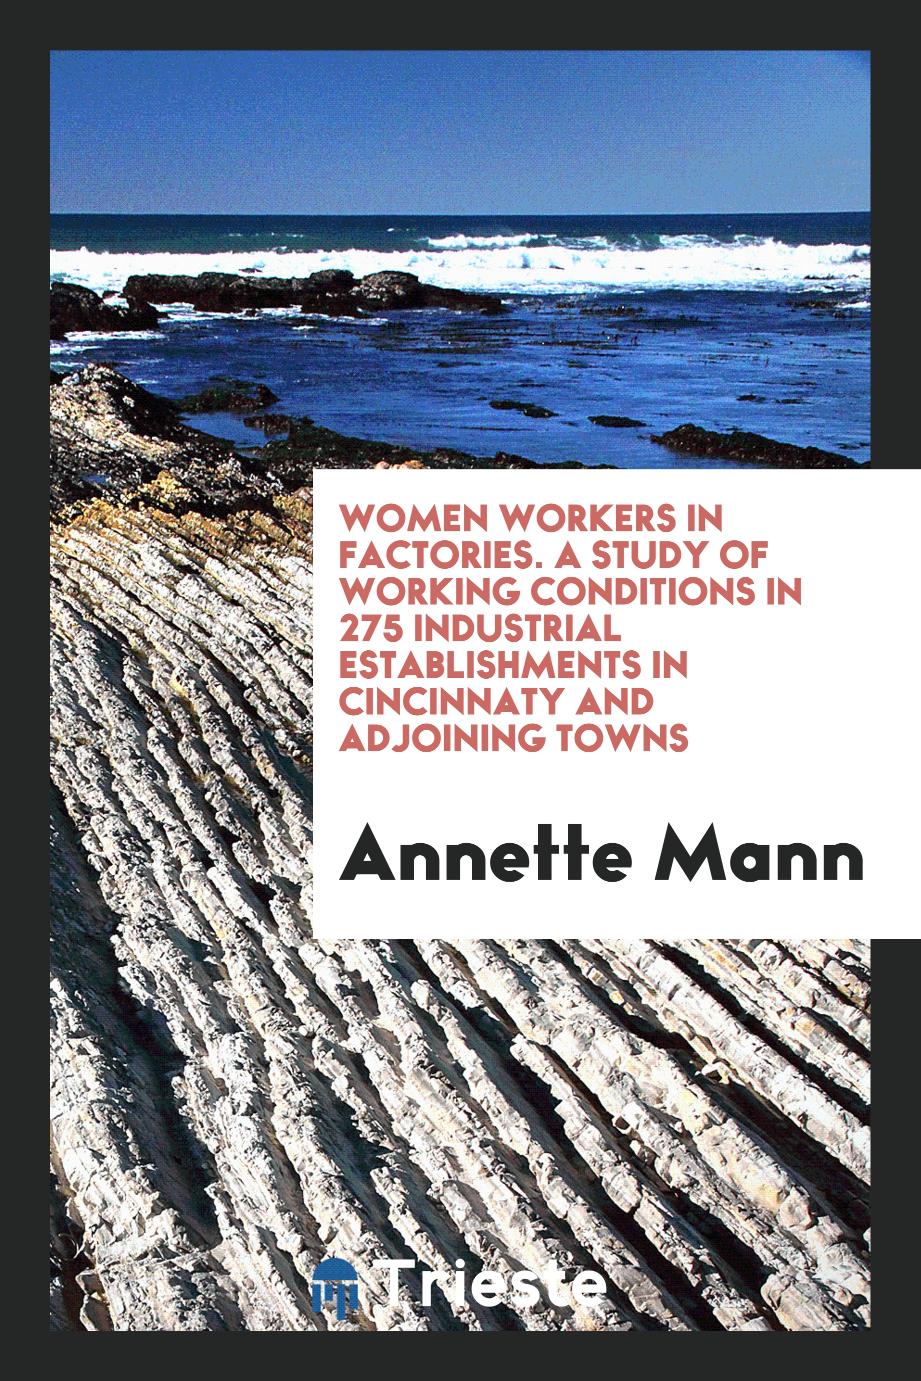 Women Workers in Factories. A study of working conditions in 275 industrial establishments in Cincinnaty and adjoining towns